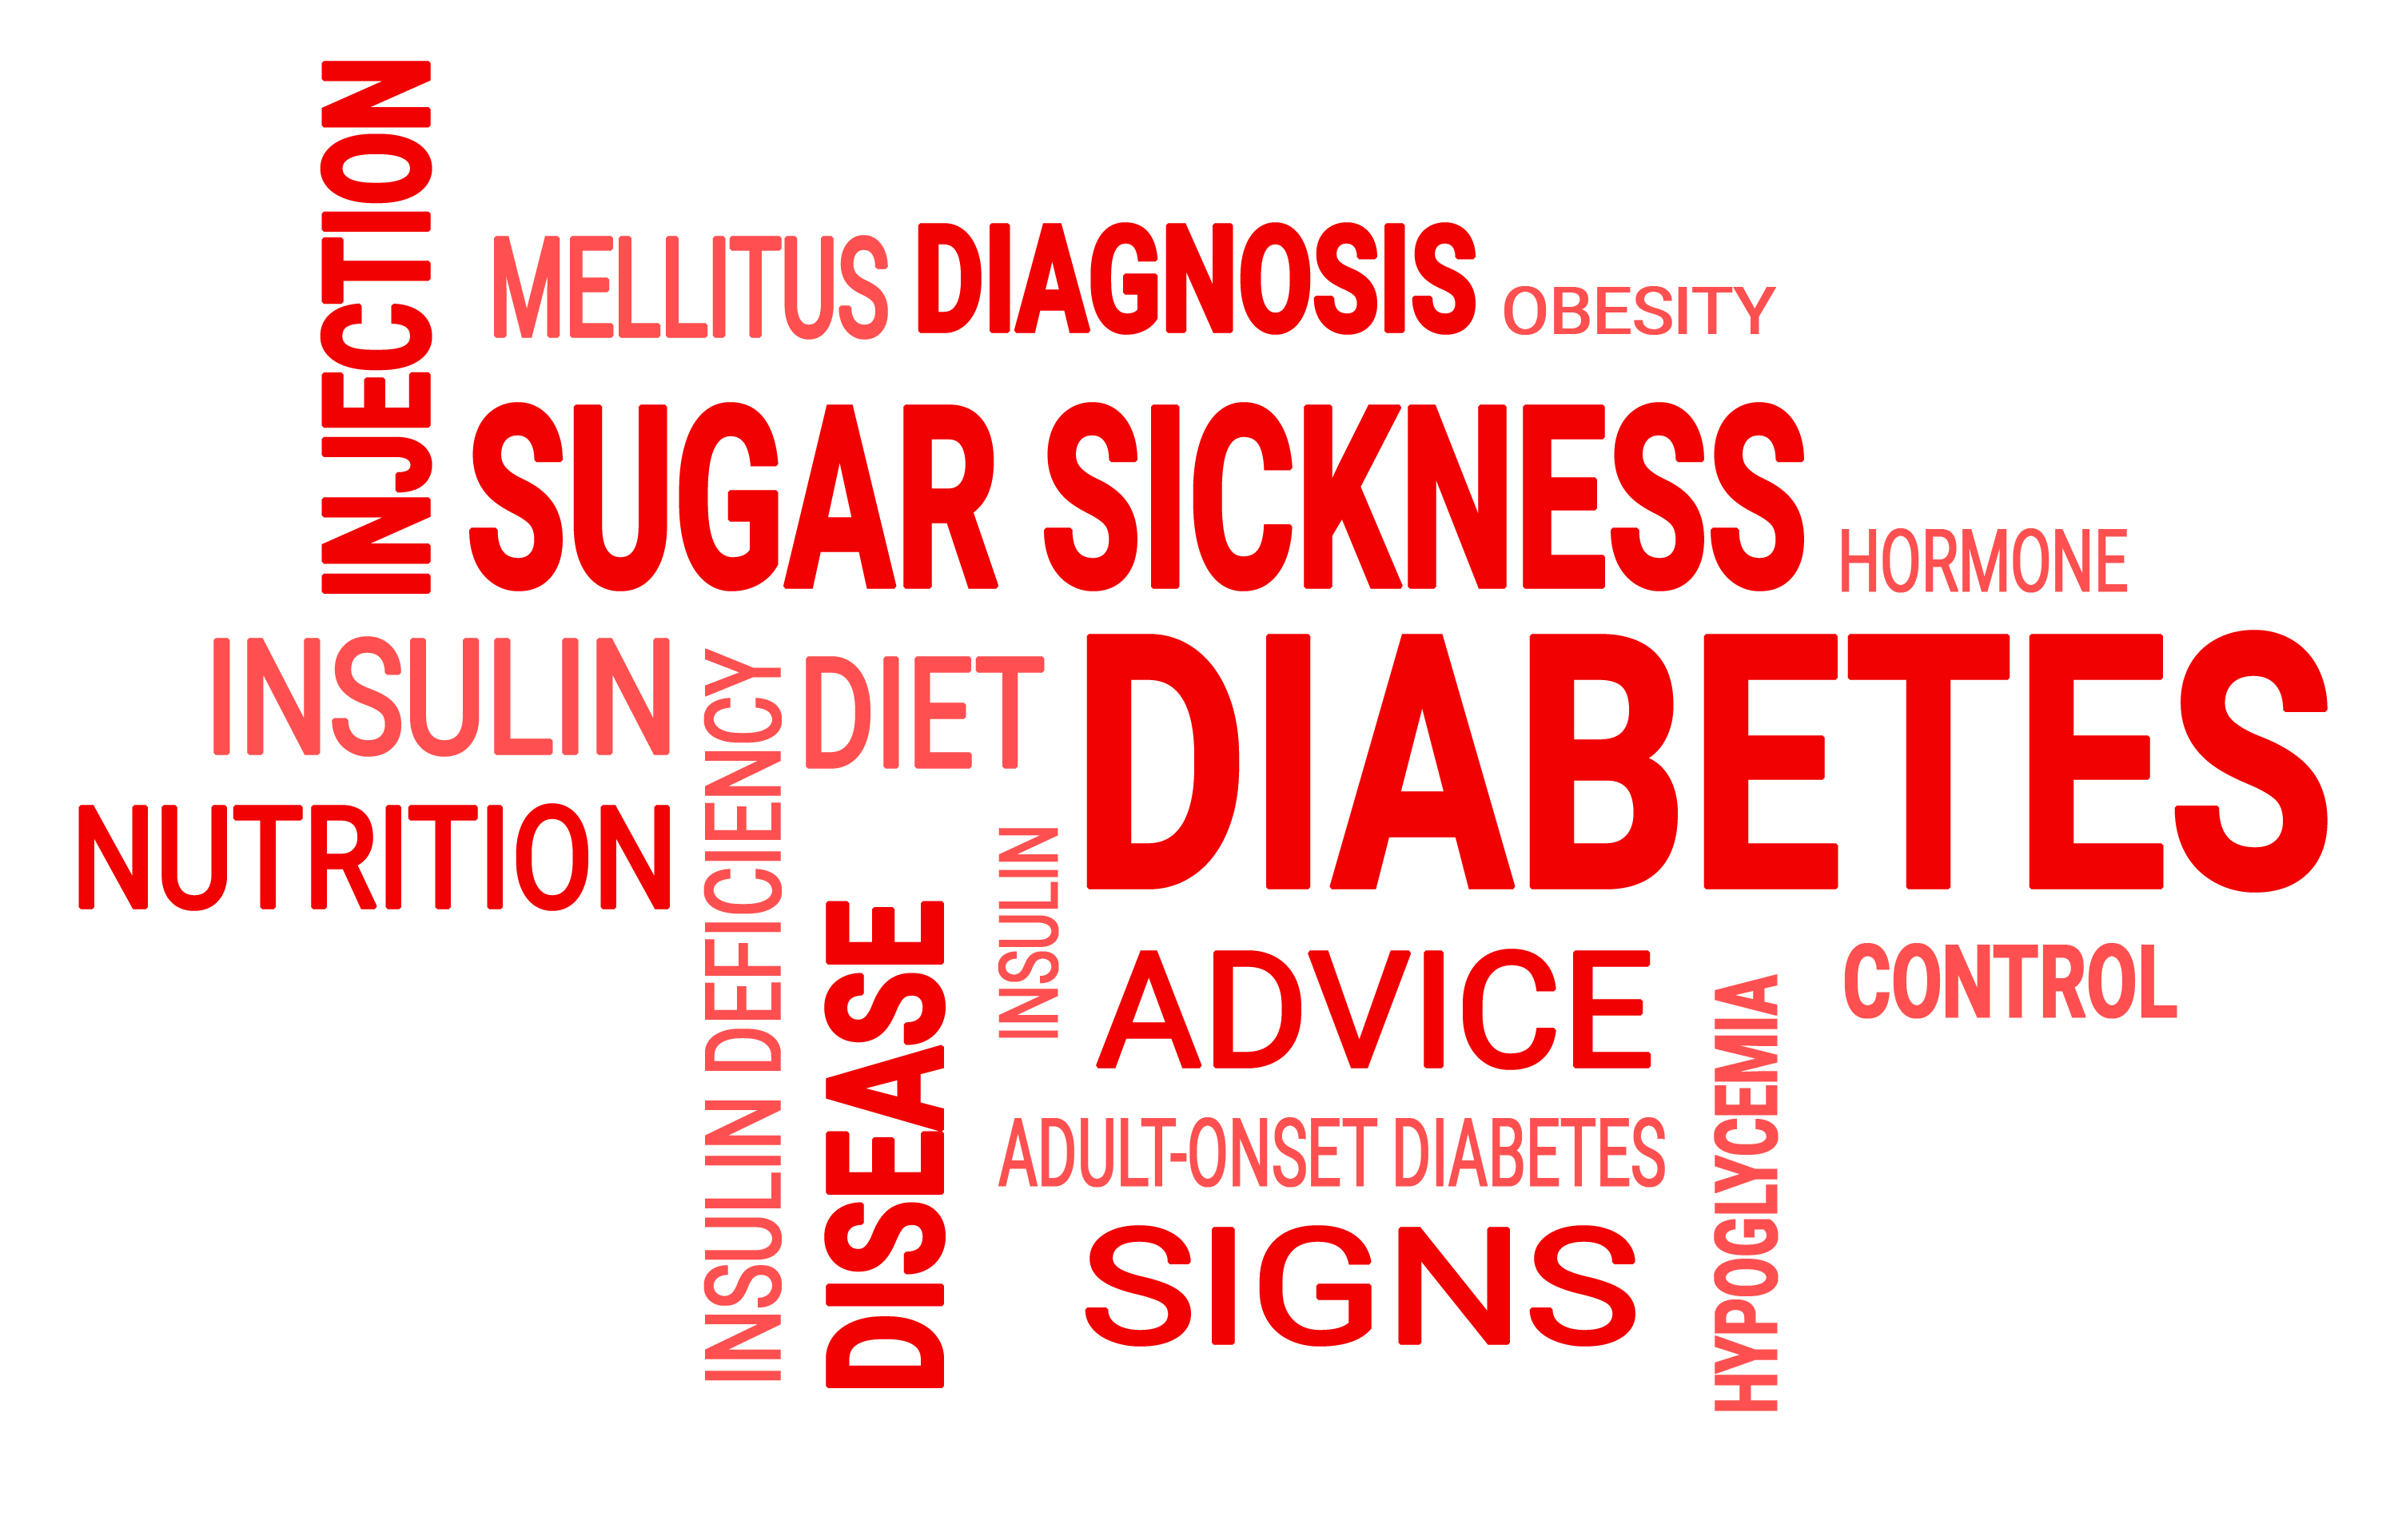 The German Diabetes Center has been researching diabetes mellitus for over 50 years.